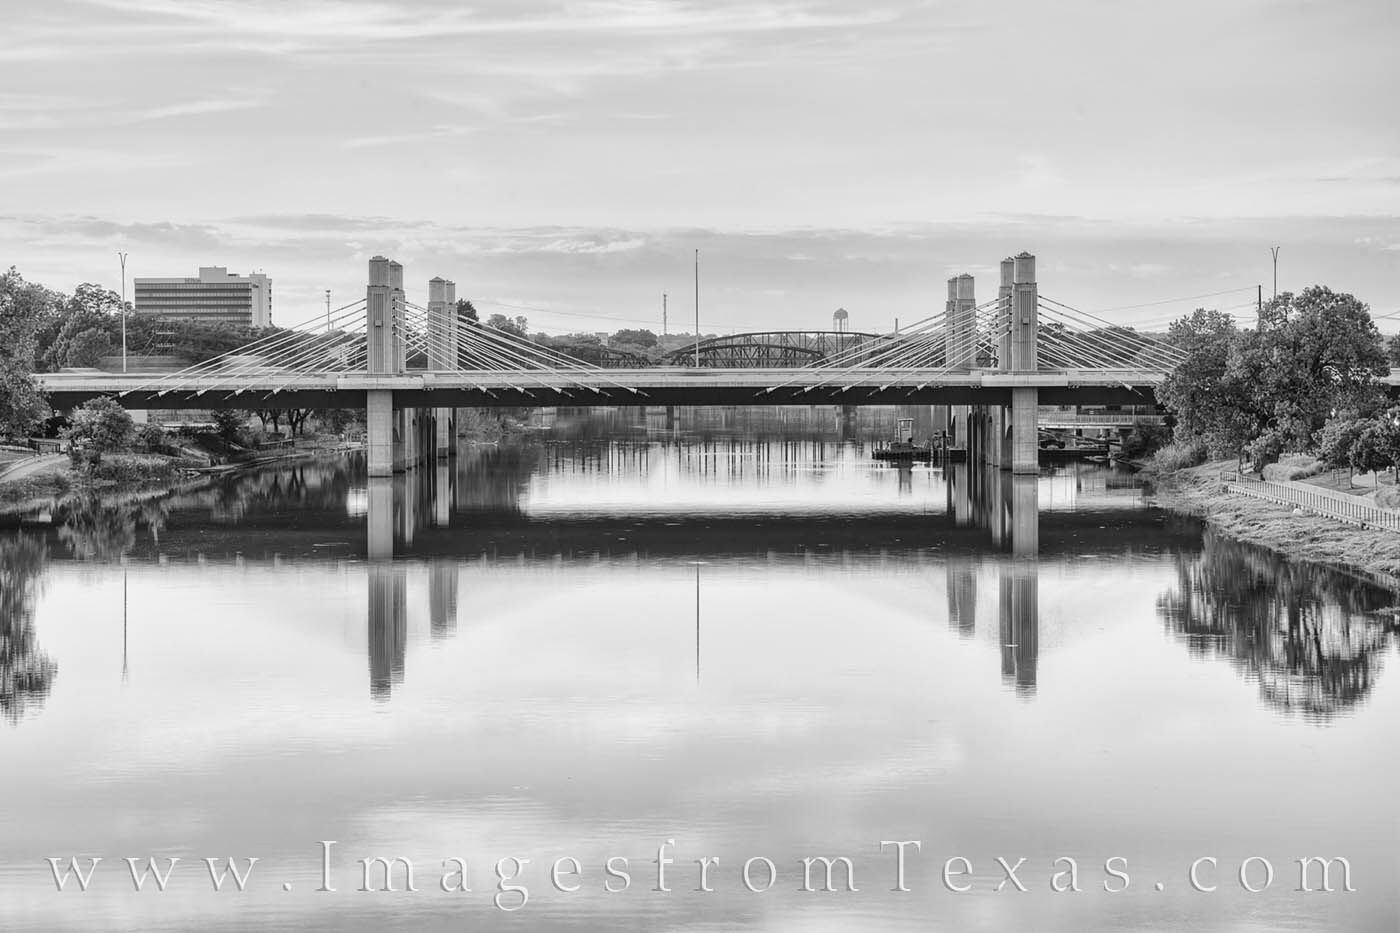 The Twin Bridges in black and white are shown in this photograph from Waco, Texas. The bridges run parallel with I-35 as they...